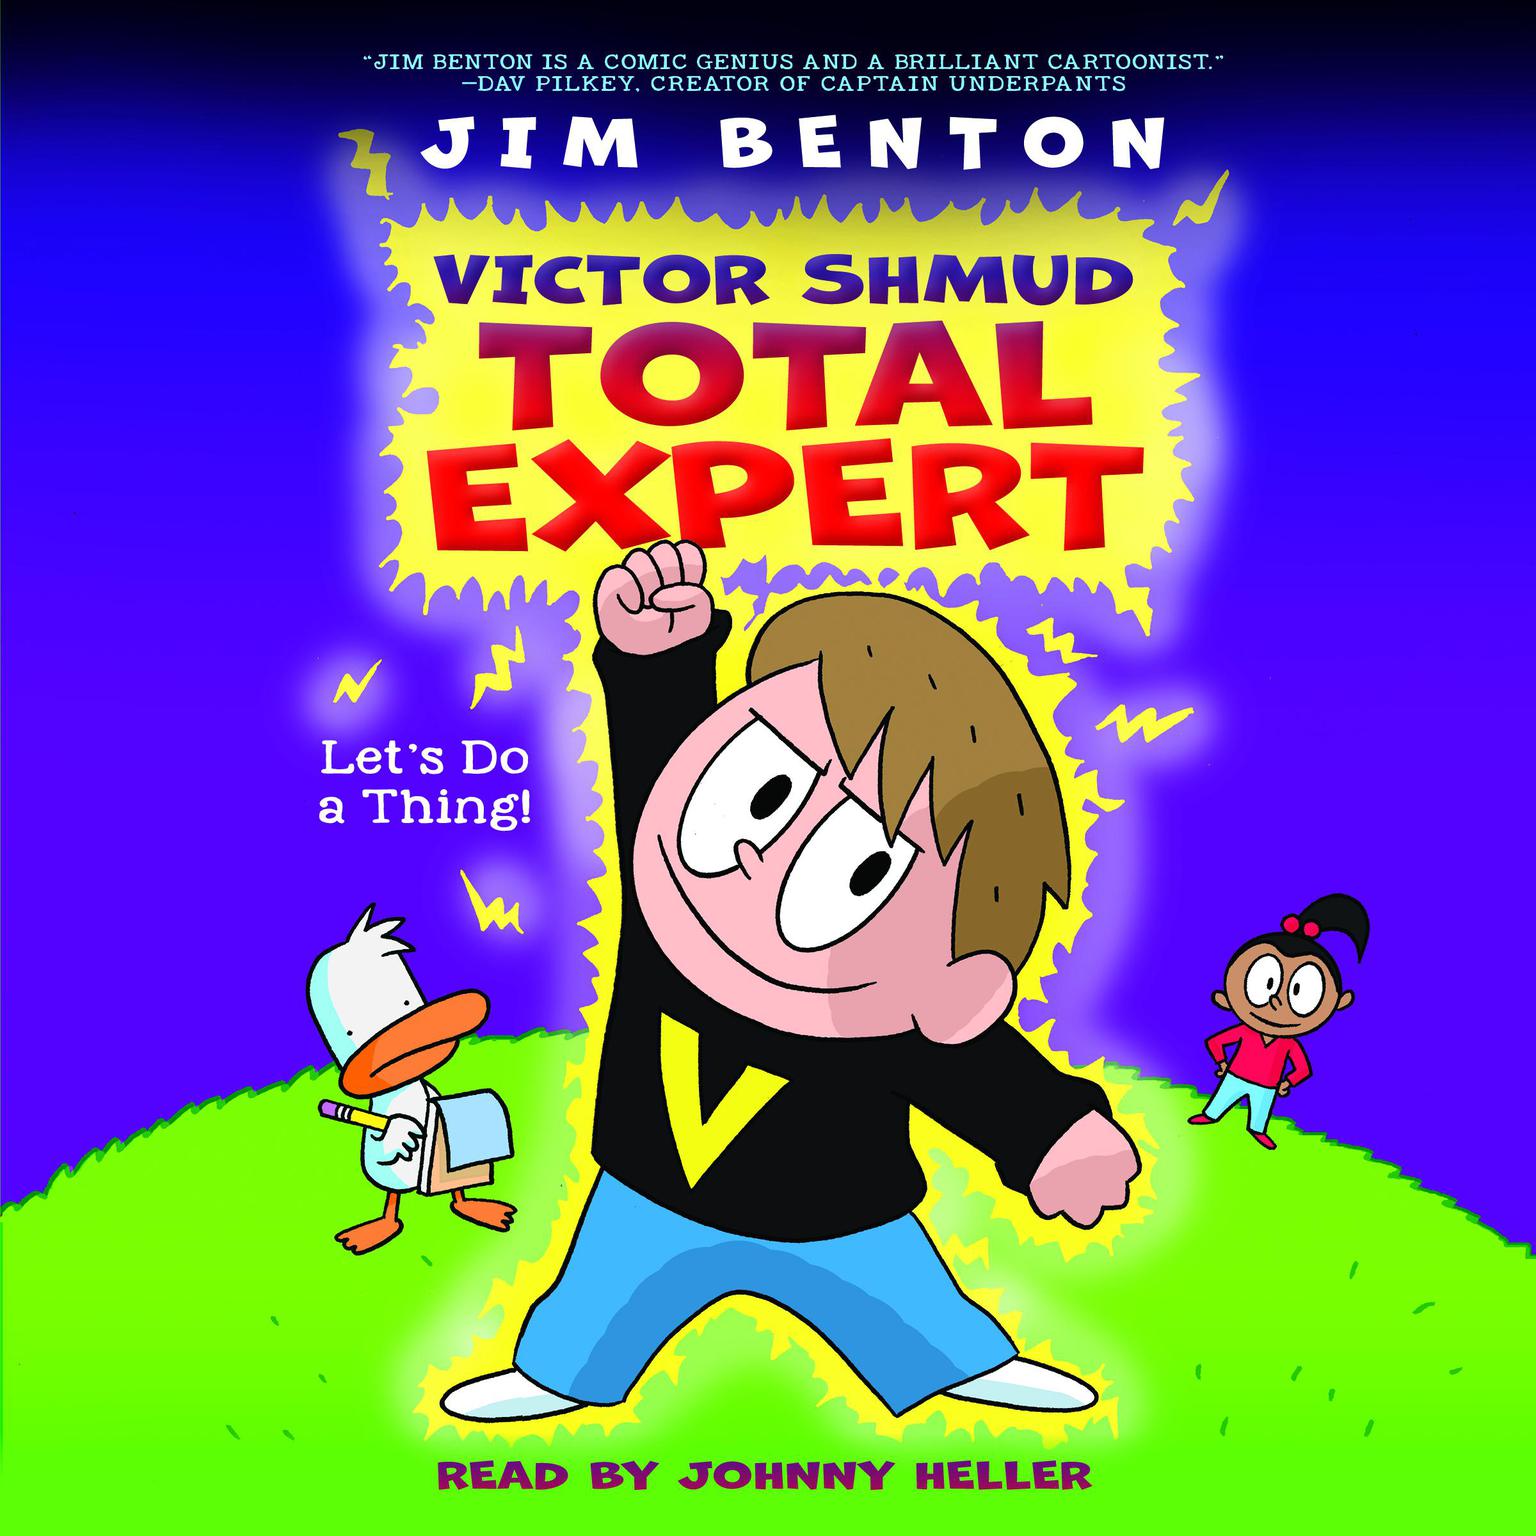 Lets Do a Thing! (Victor Shmud, Total Expert #1) Audiobook, by Jim Benton